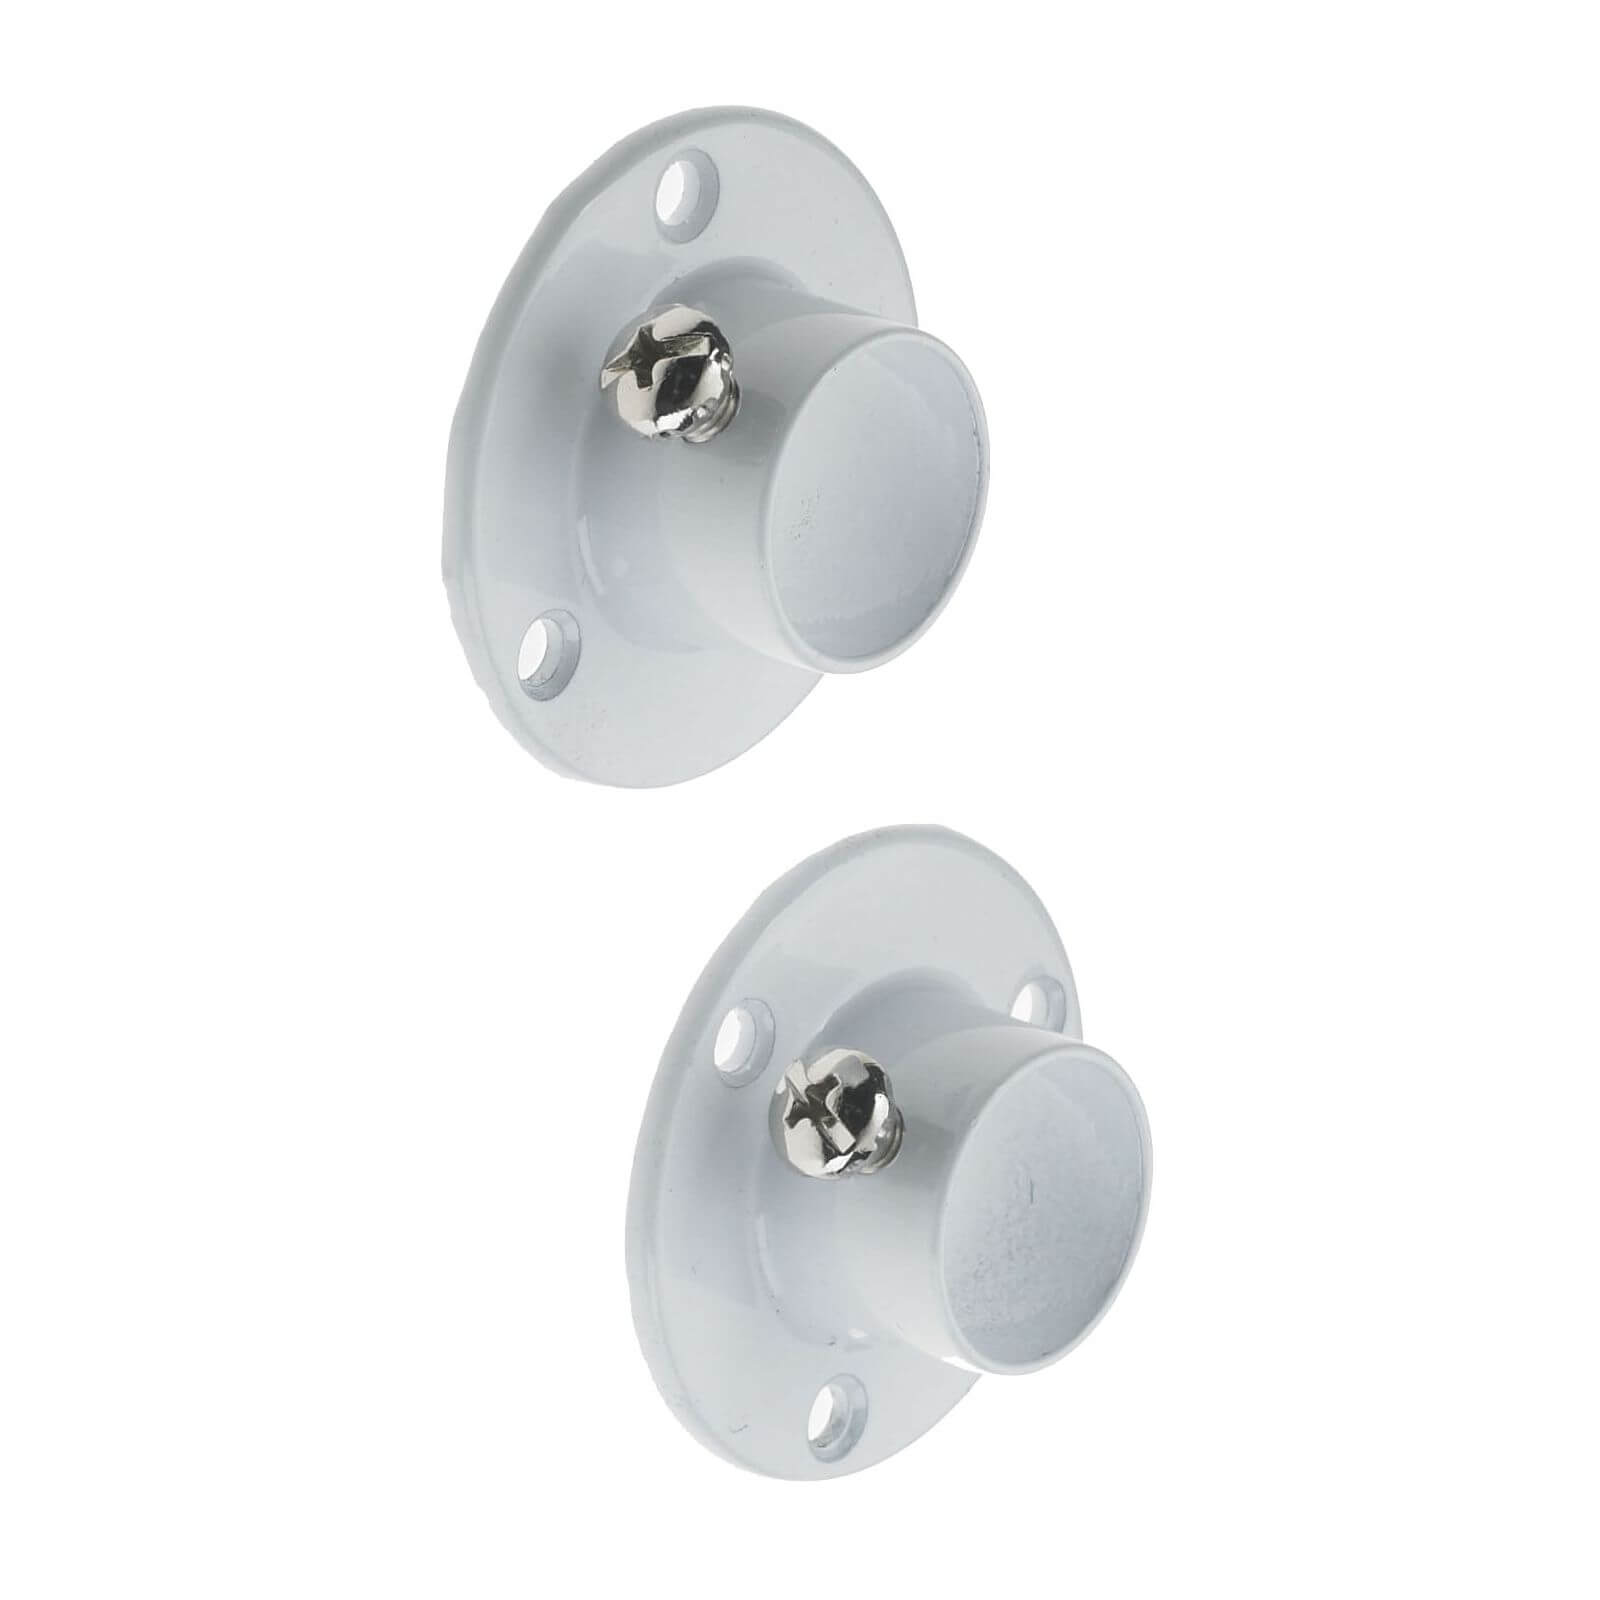 Photo of Super Deluxe Sockets - White - 19mm